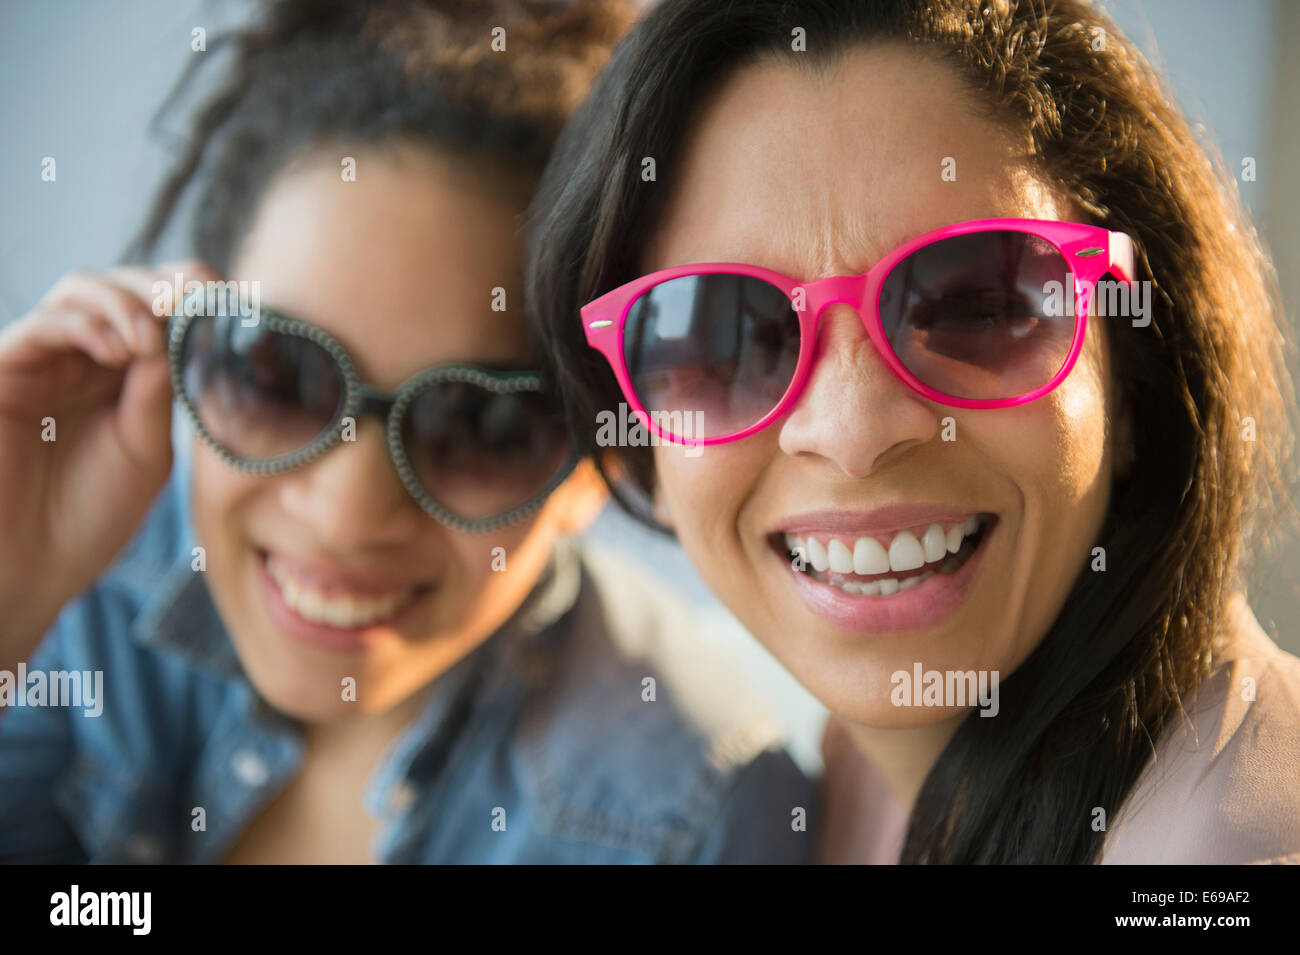 Mother and daughter wearing novelty sunglasses Stock Photo